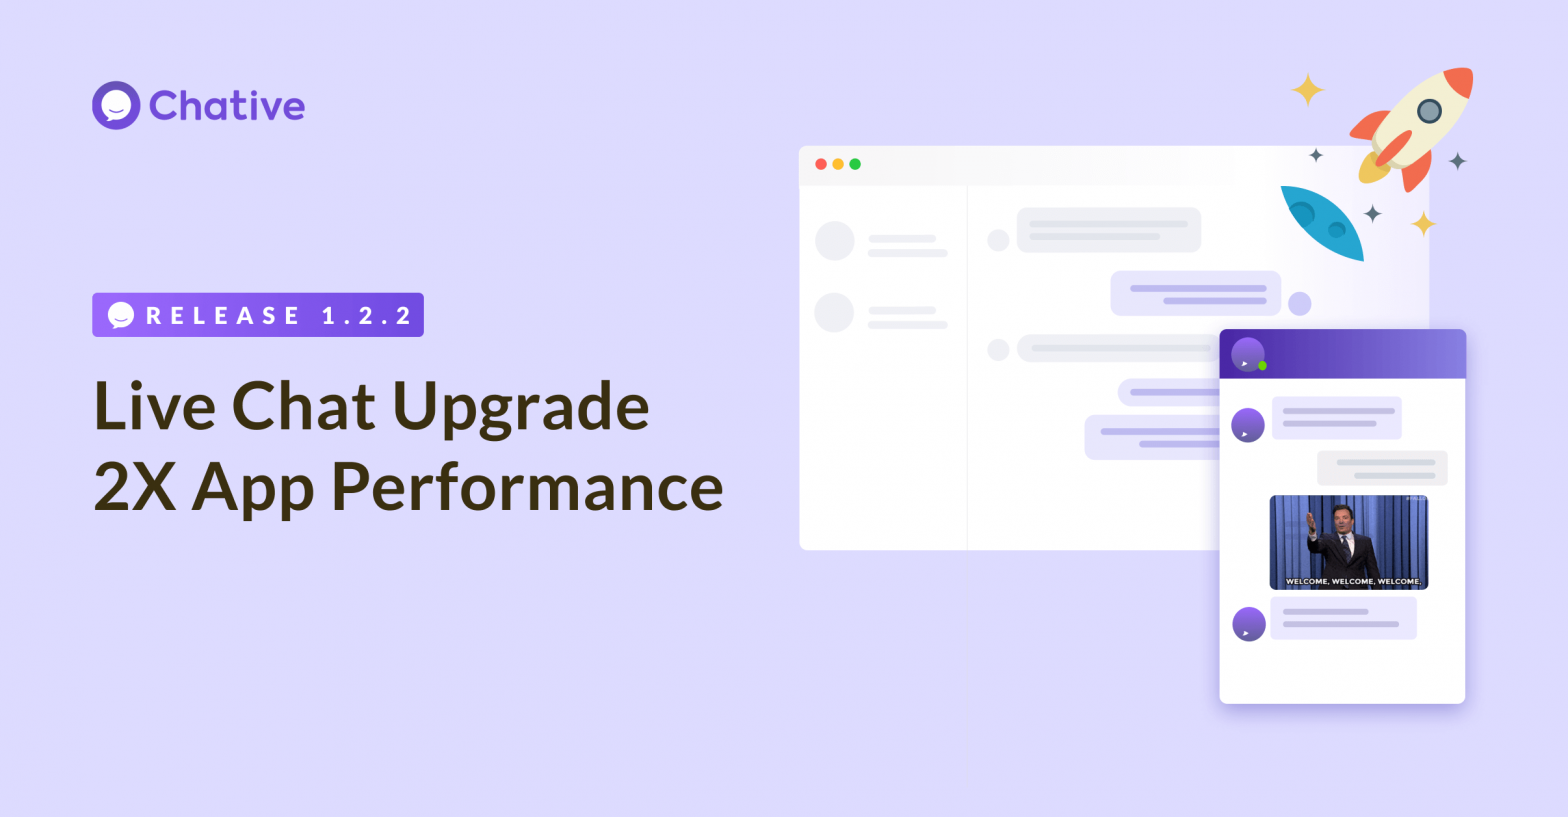 http-2-upgrade-live-chat-app-performance